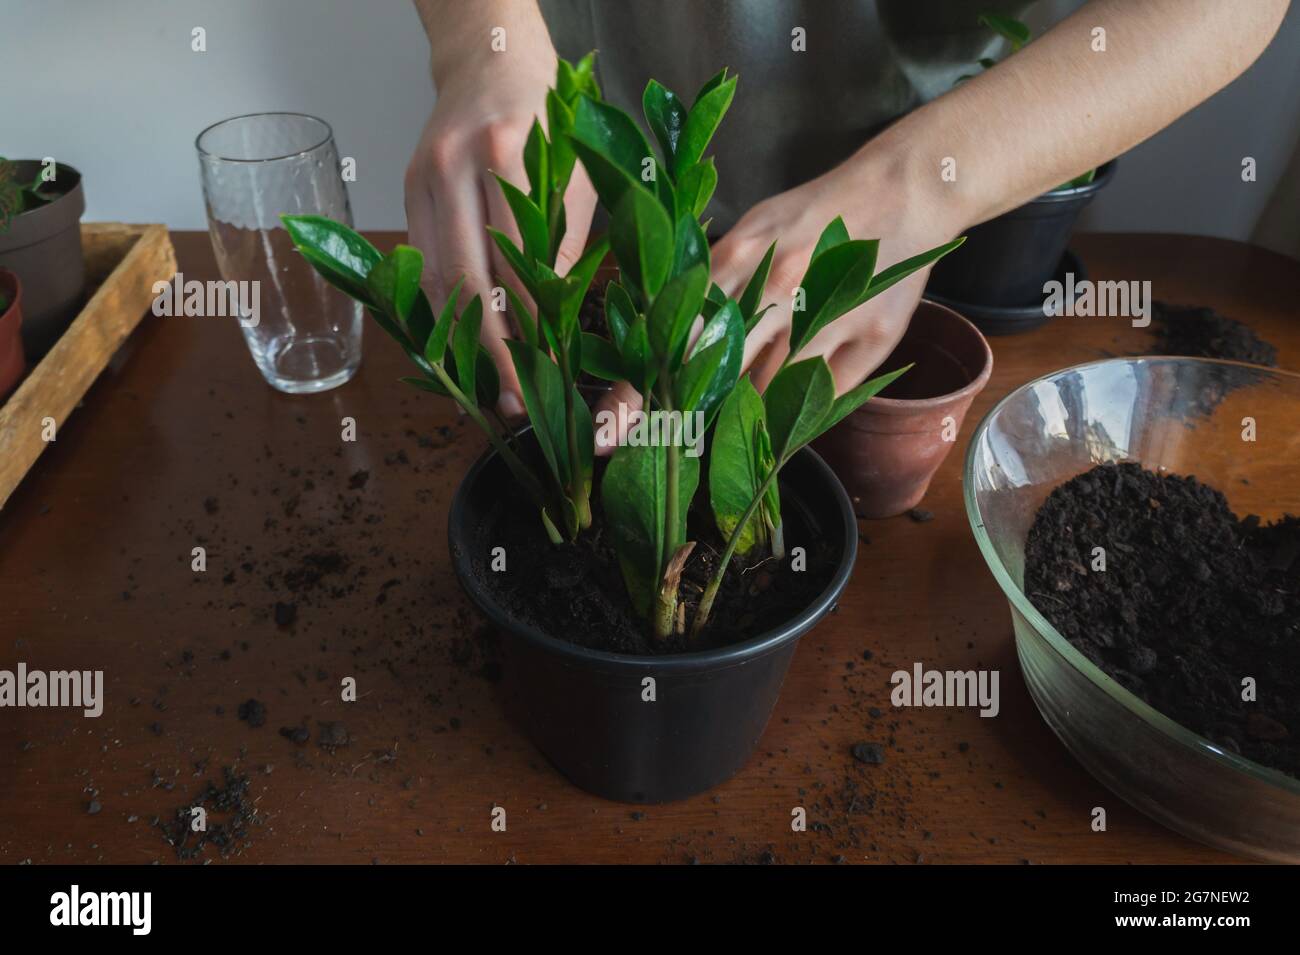 A person repotting a ZZ plant inside a apartment, on top of a wooden table with dirt and others houseplants on the background. Stock Photo